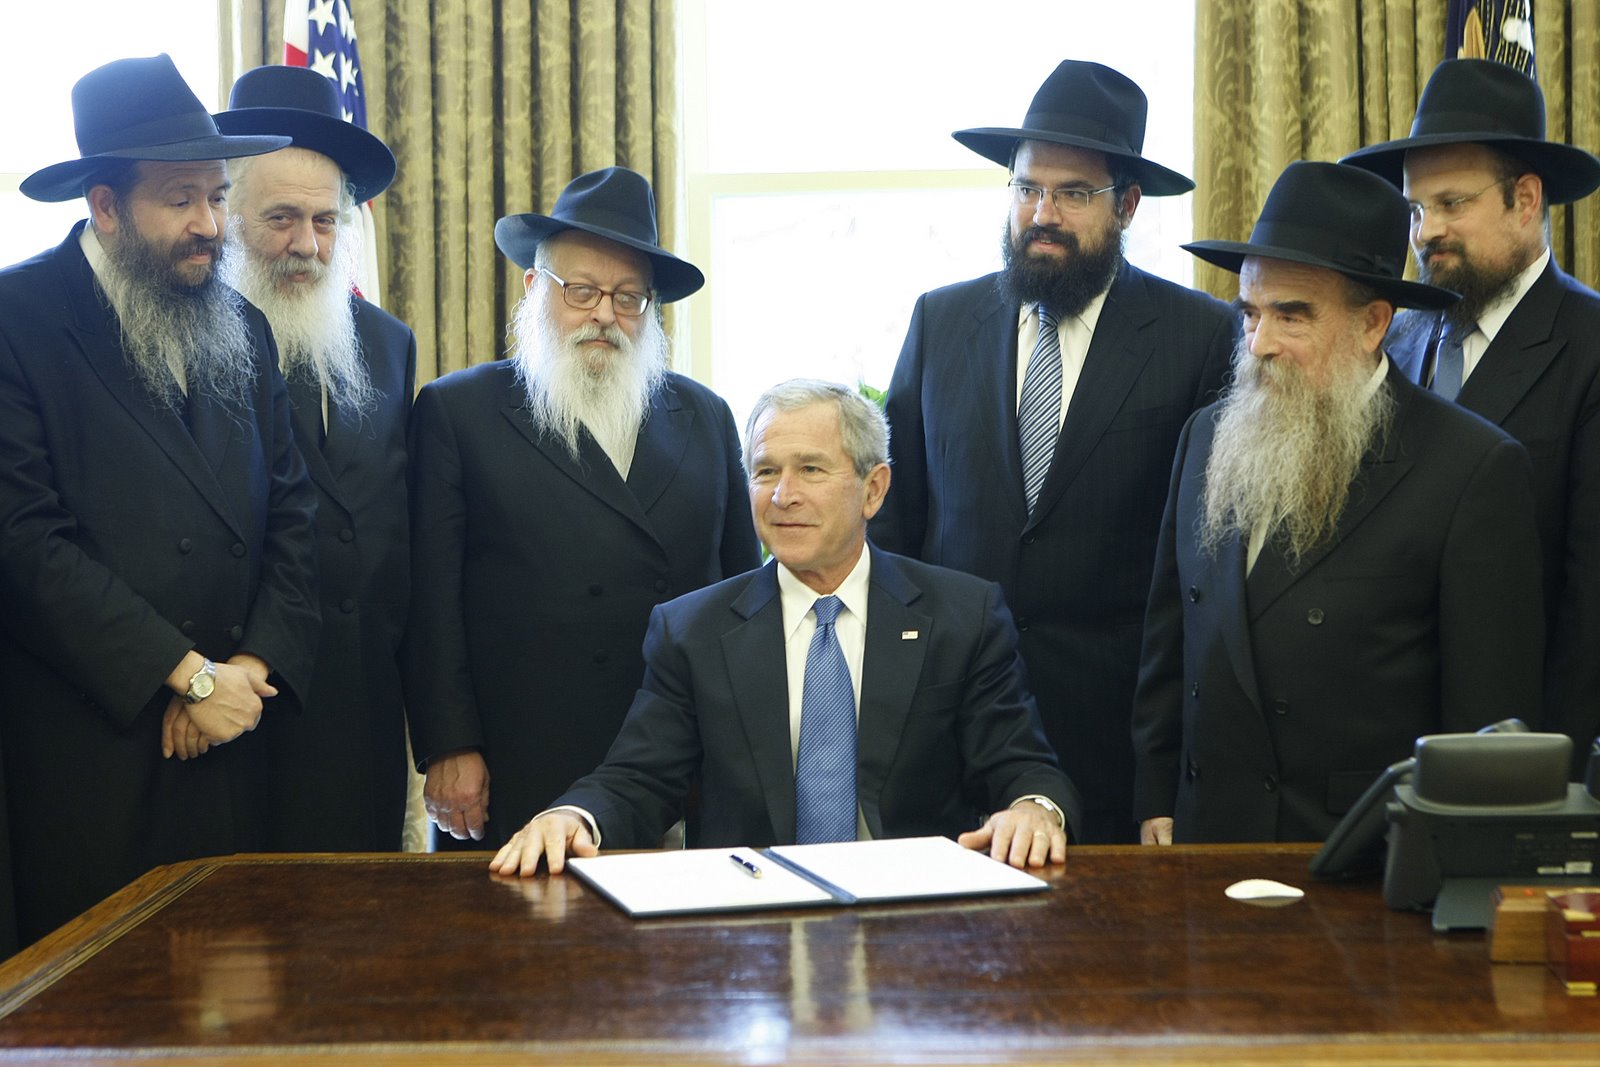 President Bush, accompanied by Chabad Rabbis, is seen in the Oval Office of the White House in Washington, Tuesday, April 15, 2008, after signing the Honor of Education and Sharing Day Proclamation. (AP Photo/Gerald Herbert)